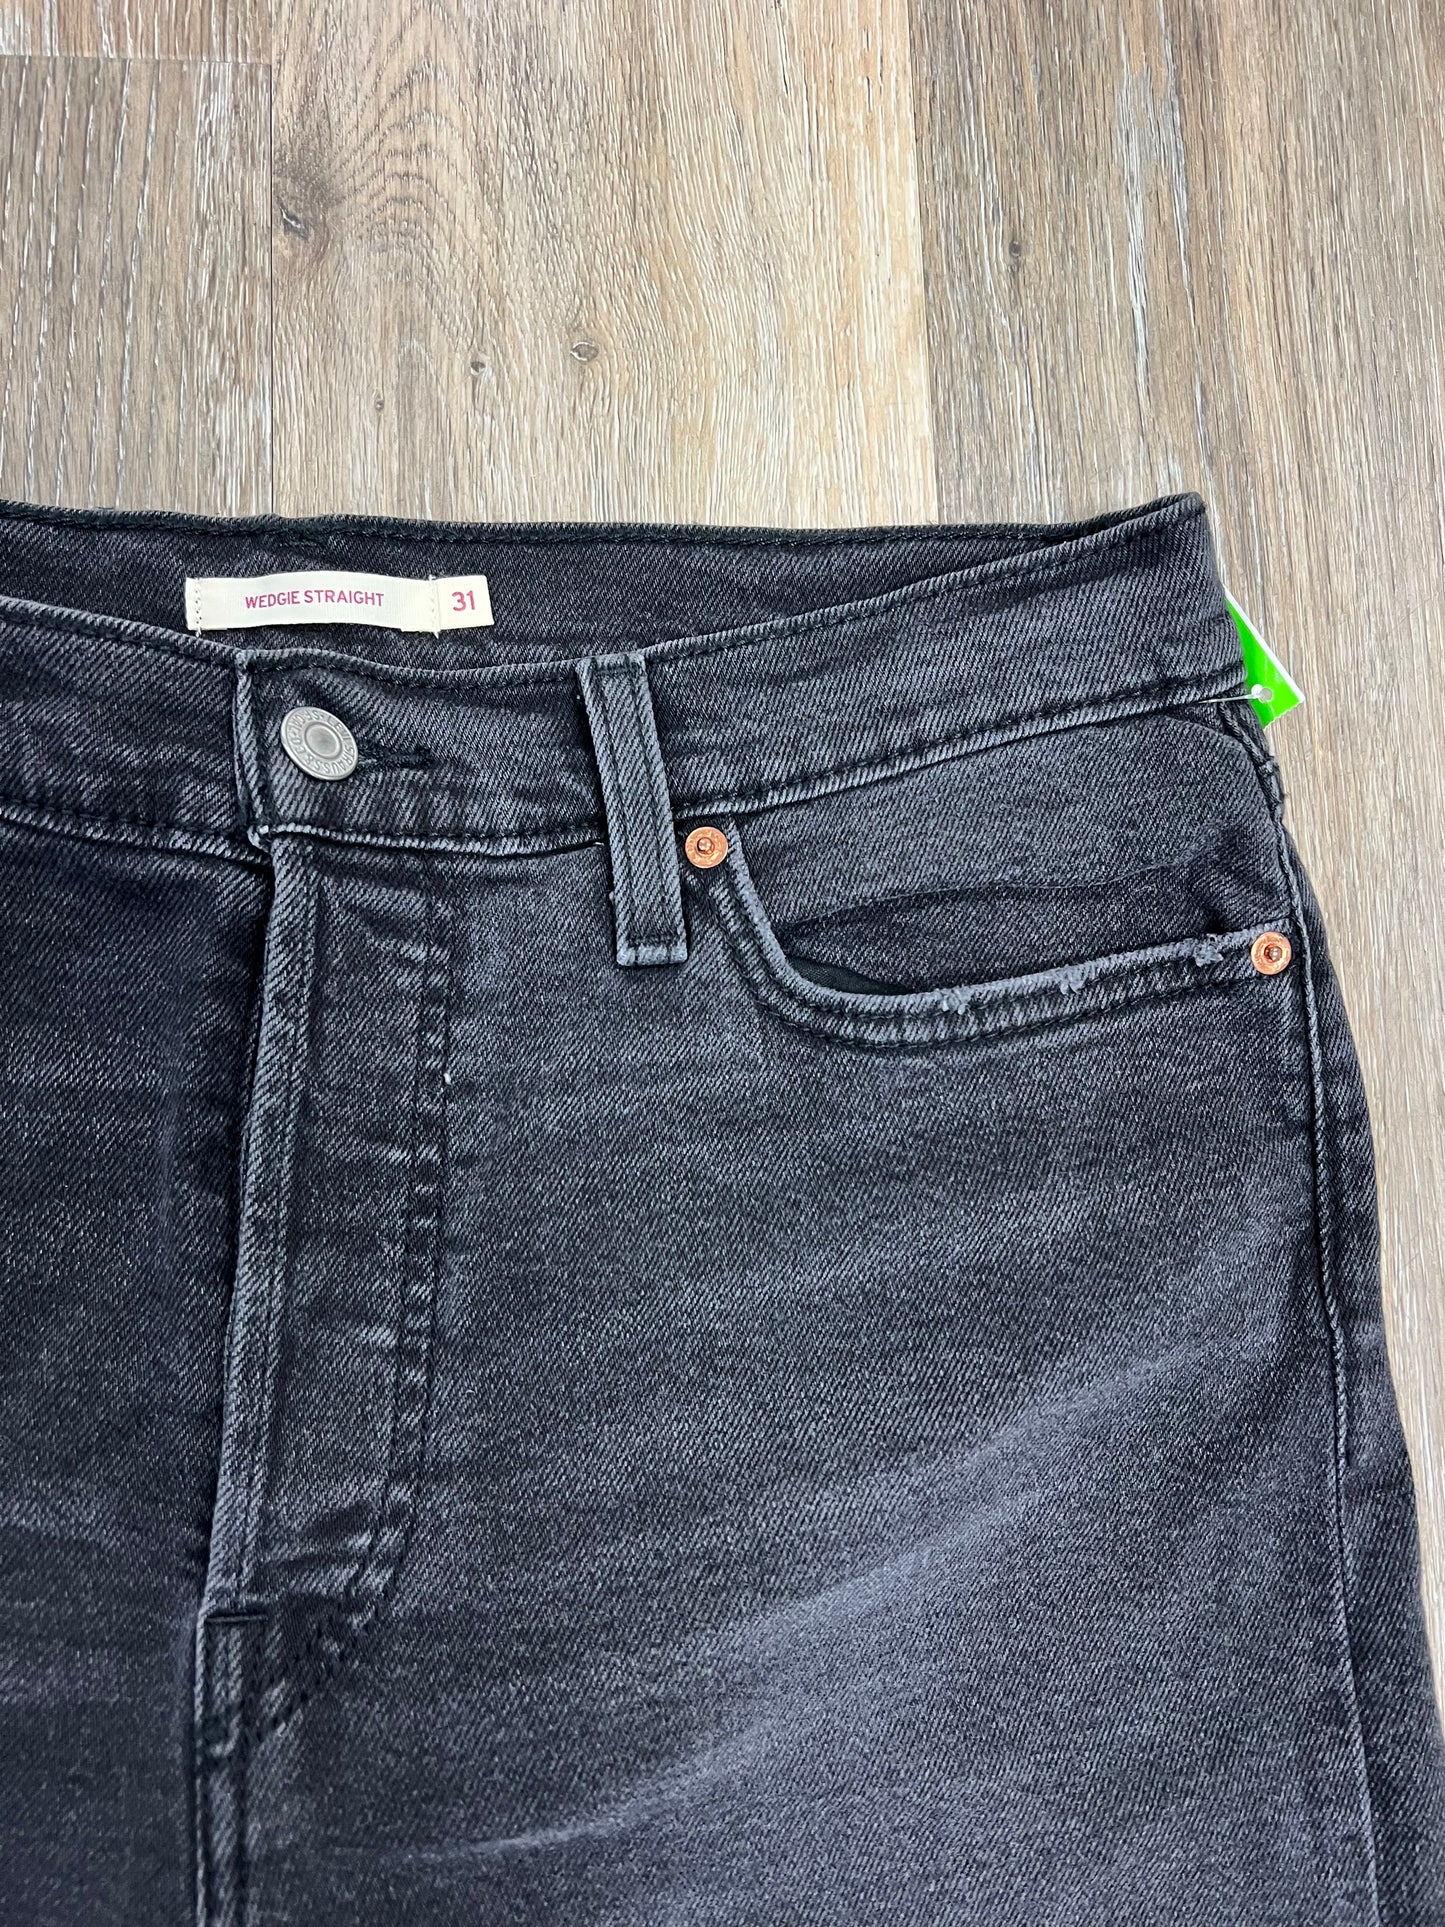 Jeans Straight By Levis  Size: 12/31